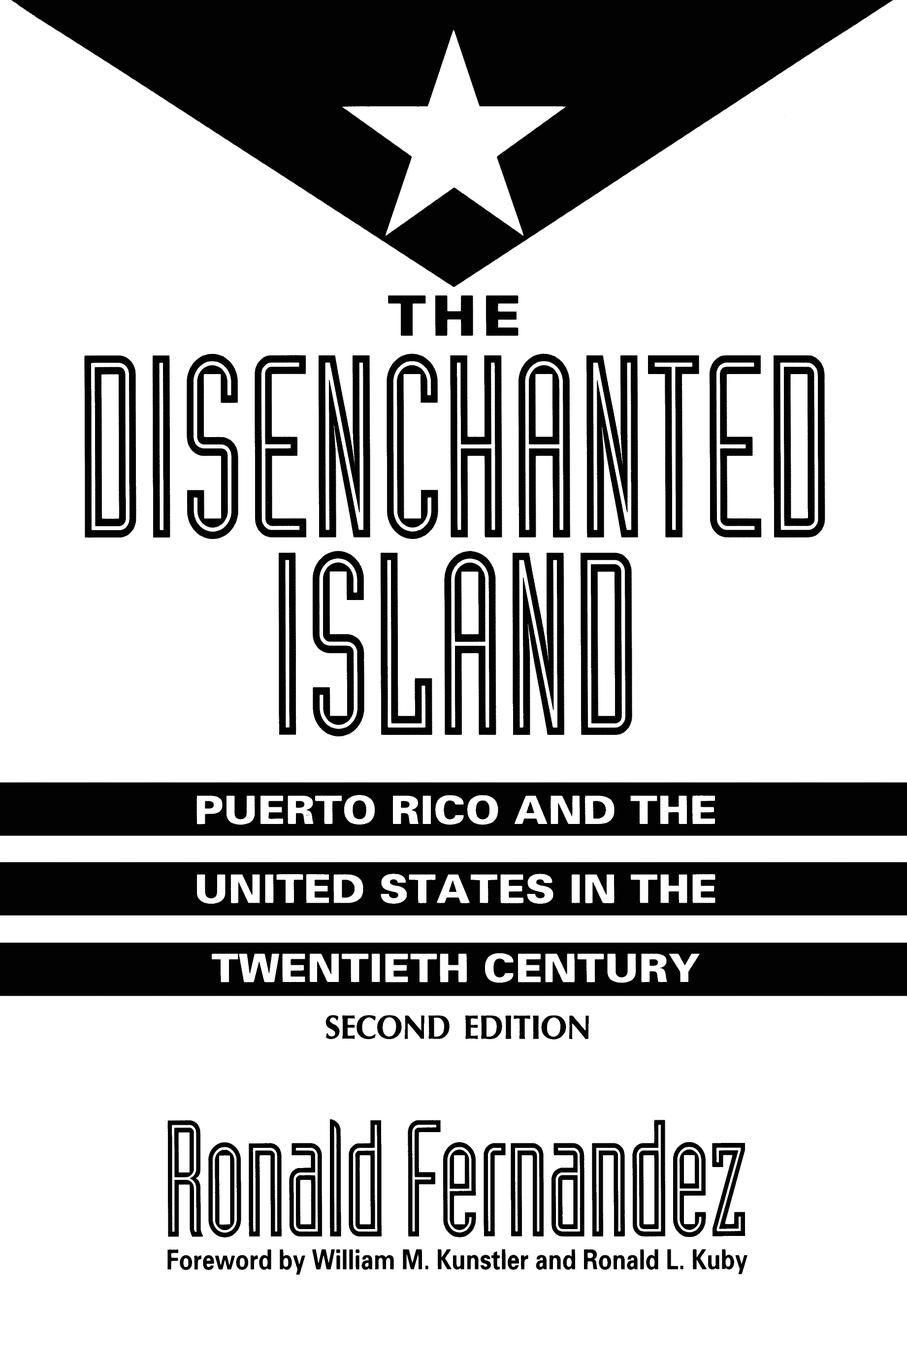 The Disenchanted Island. Puerto Rico and the United States in the Twentieth Century